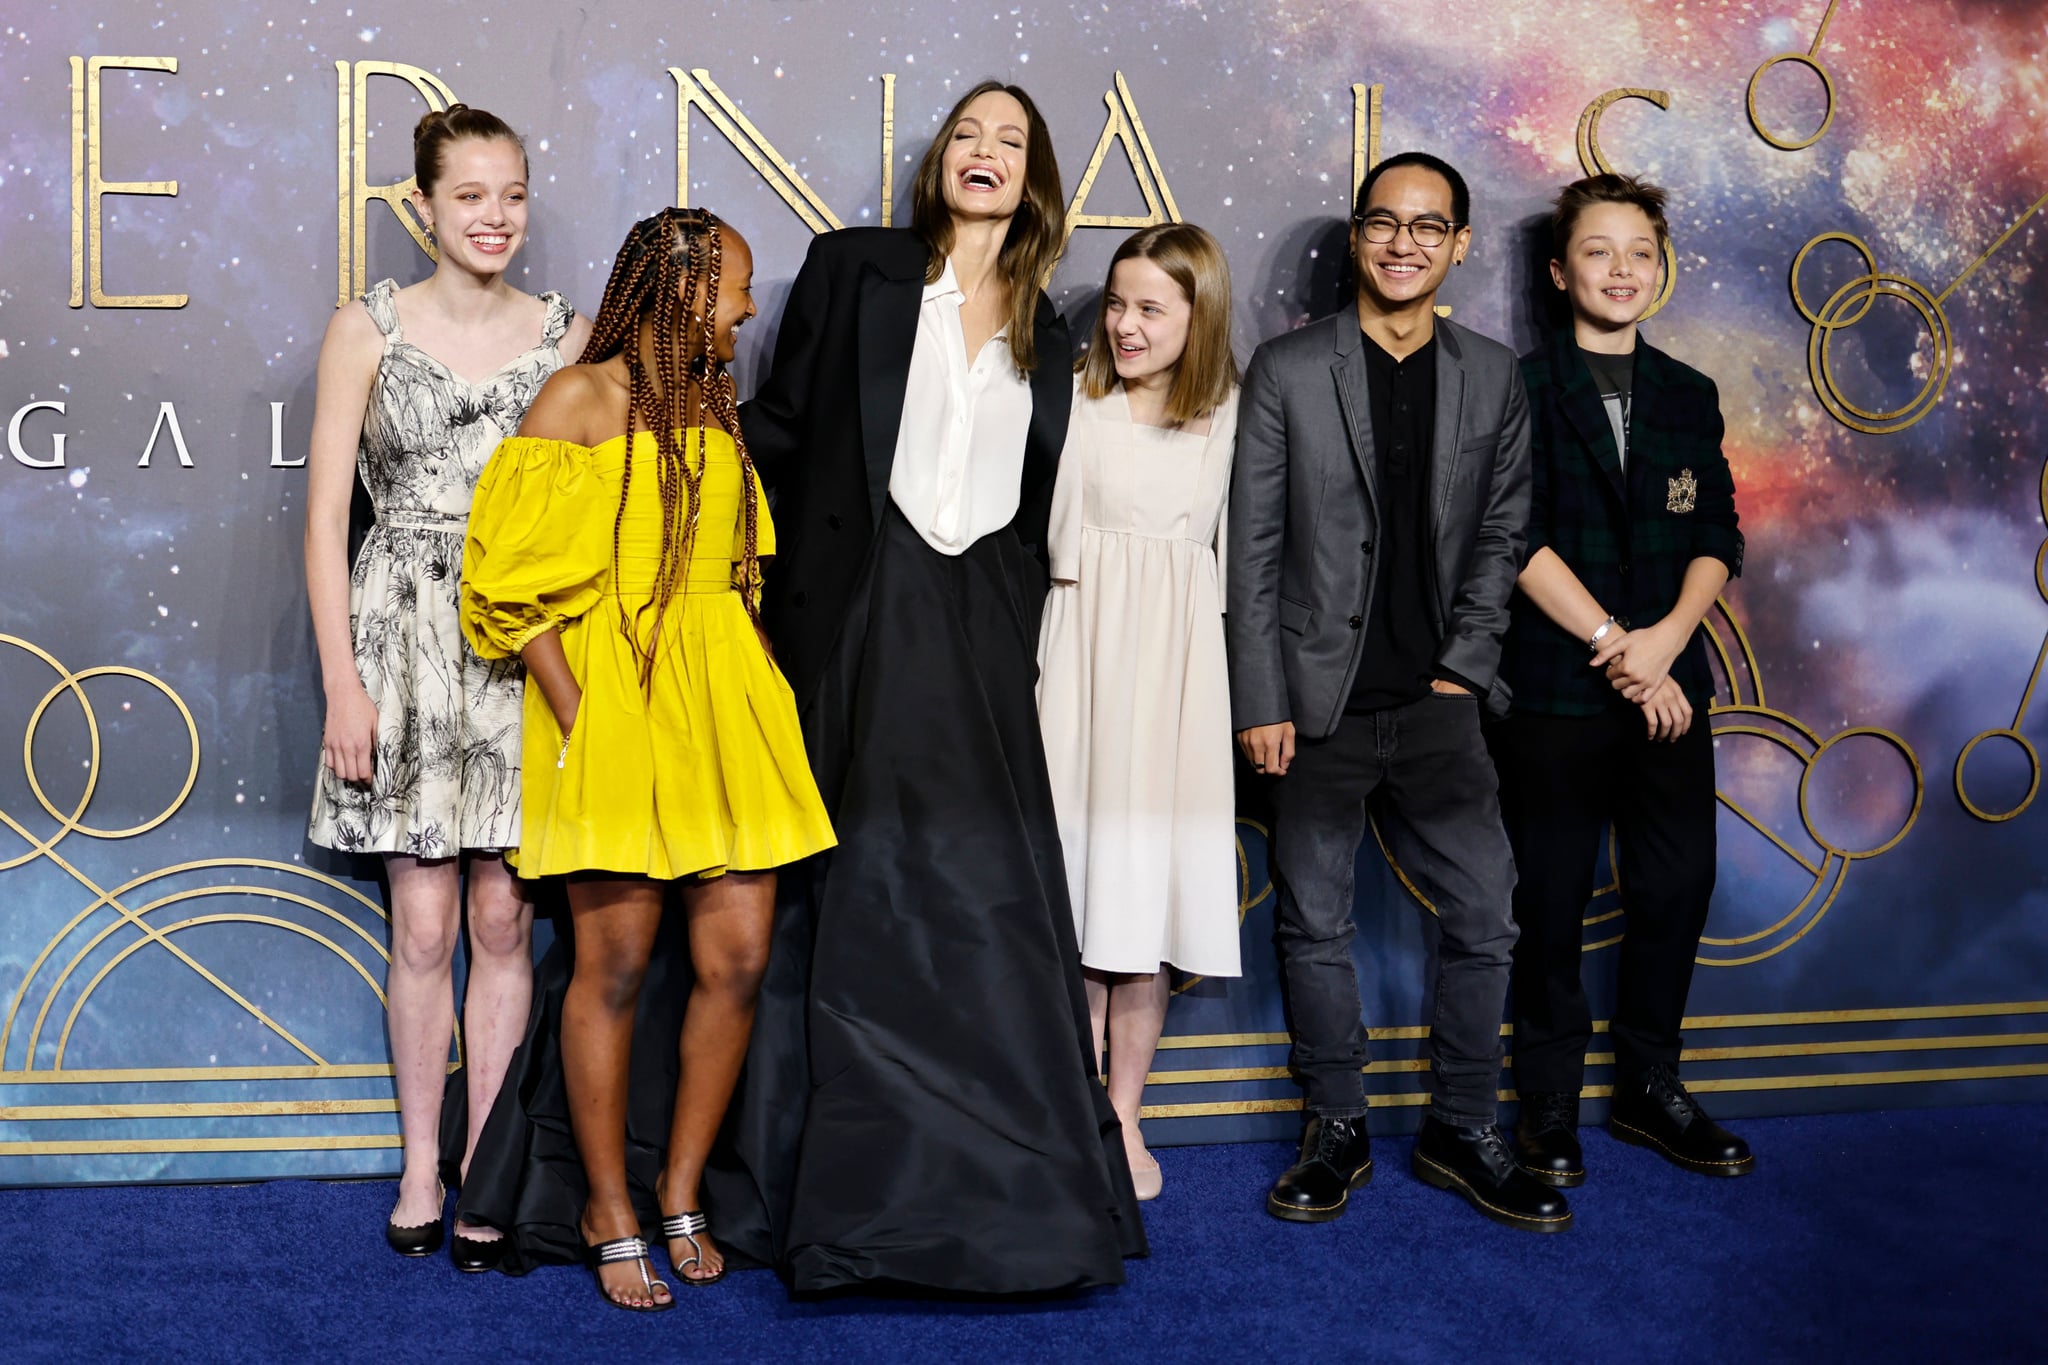 TOPSHOT - US actor Angelina Jolie (3rd L) poses with her children, (L-R) Shiloh Jolie-Pitt, Zahara Jolie-Pitt, Vivienne Jolie-Pitt, Maddox Jolie-Pitt and Knox Jolie-Pitton on the blue carpet on arrival to attend the UK Gala Screening of the film 'Eternals', at the BFI IMAX in London on October 27, 2021. (Photo by Tolga Akmen / AFP) (Photo by TOLGA AKMEN/AFP via Getty Images)